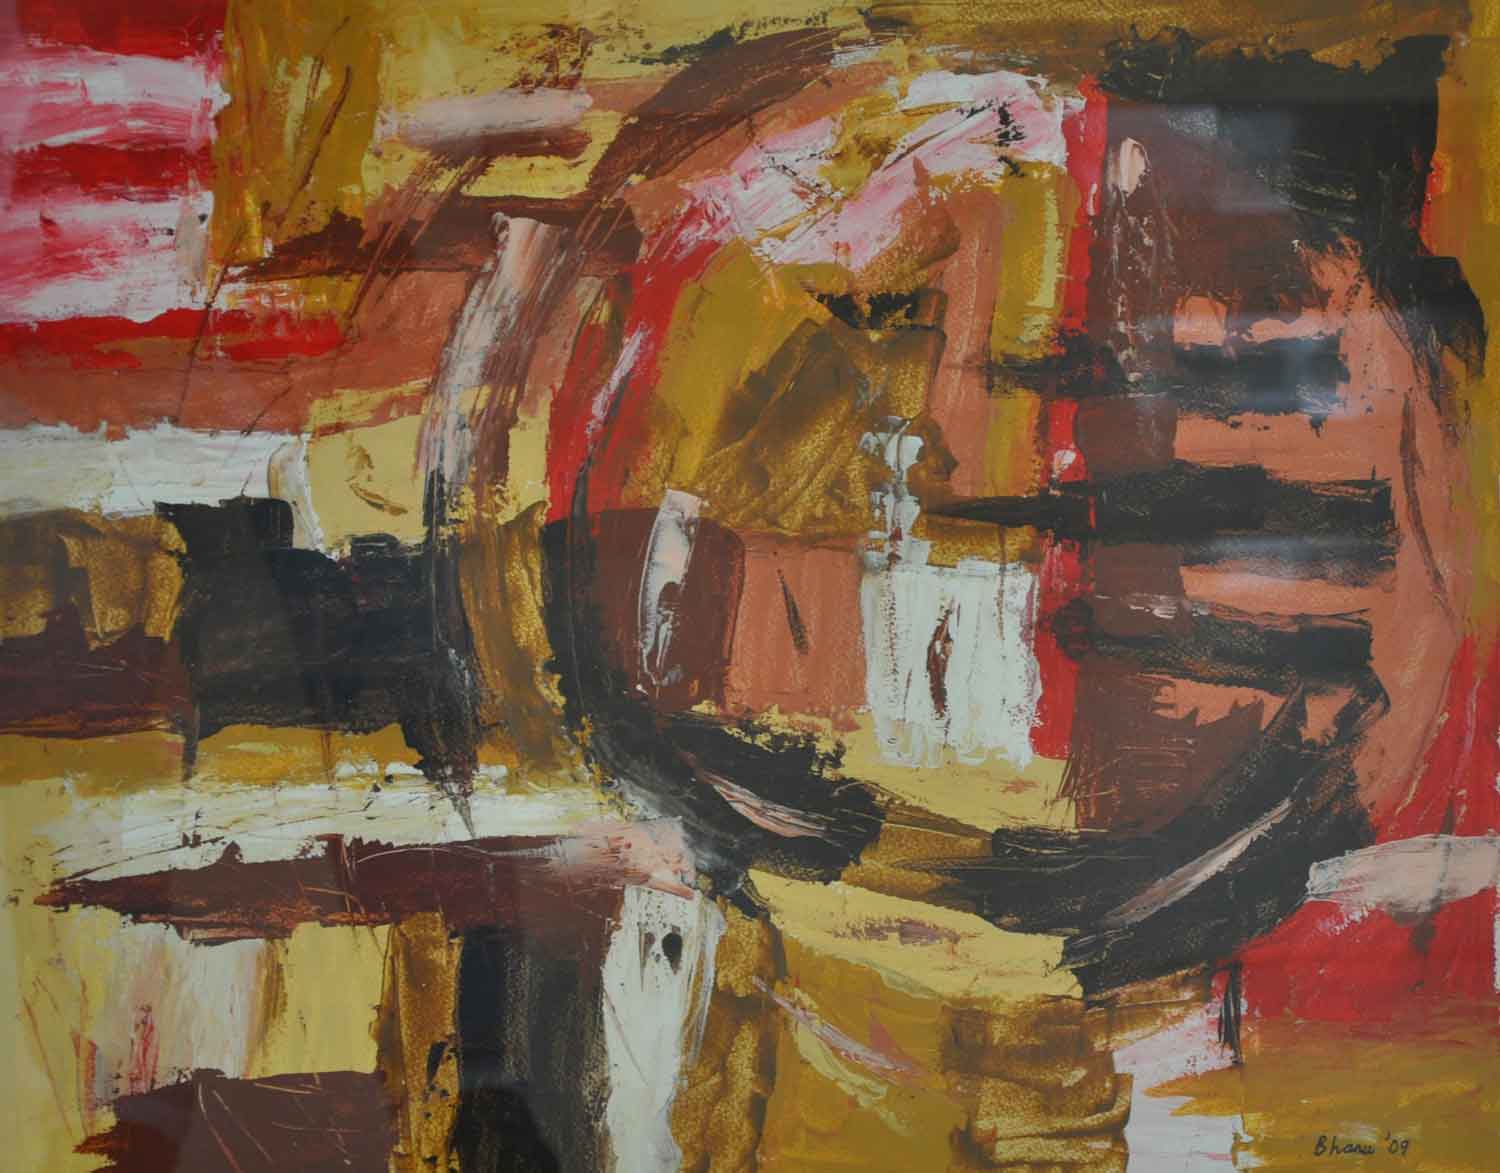 6-Abstract Landscape III, 2009 RM 1,650-SOLD | Oil on paper 53 x 69 cm | 54.5 x 67 cm